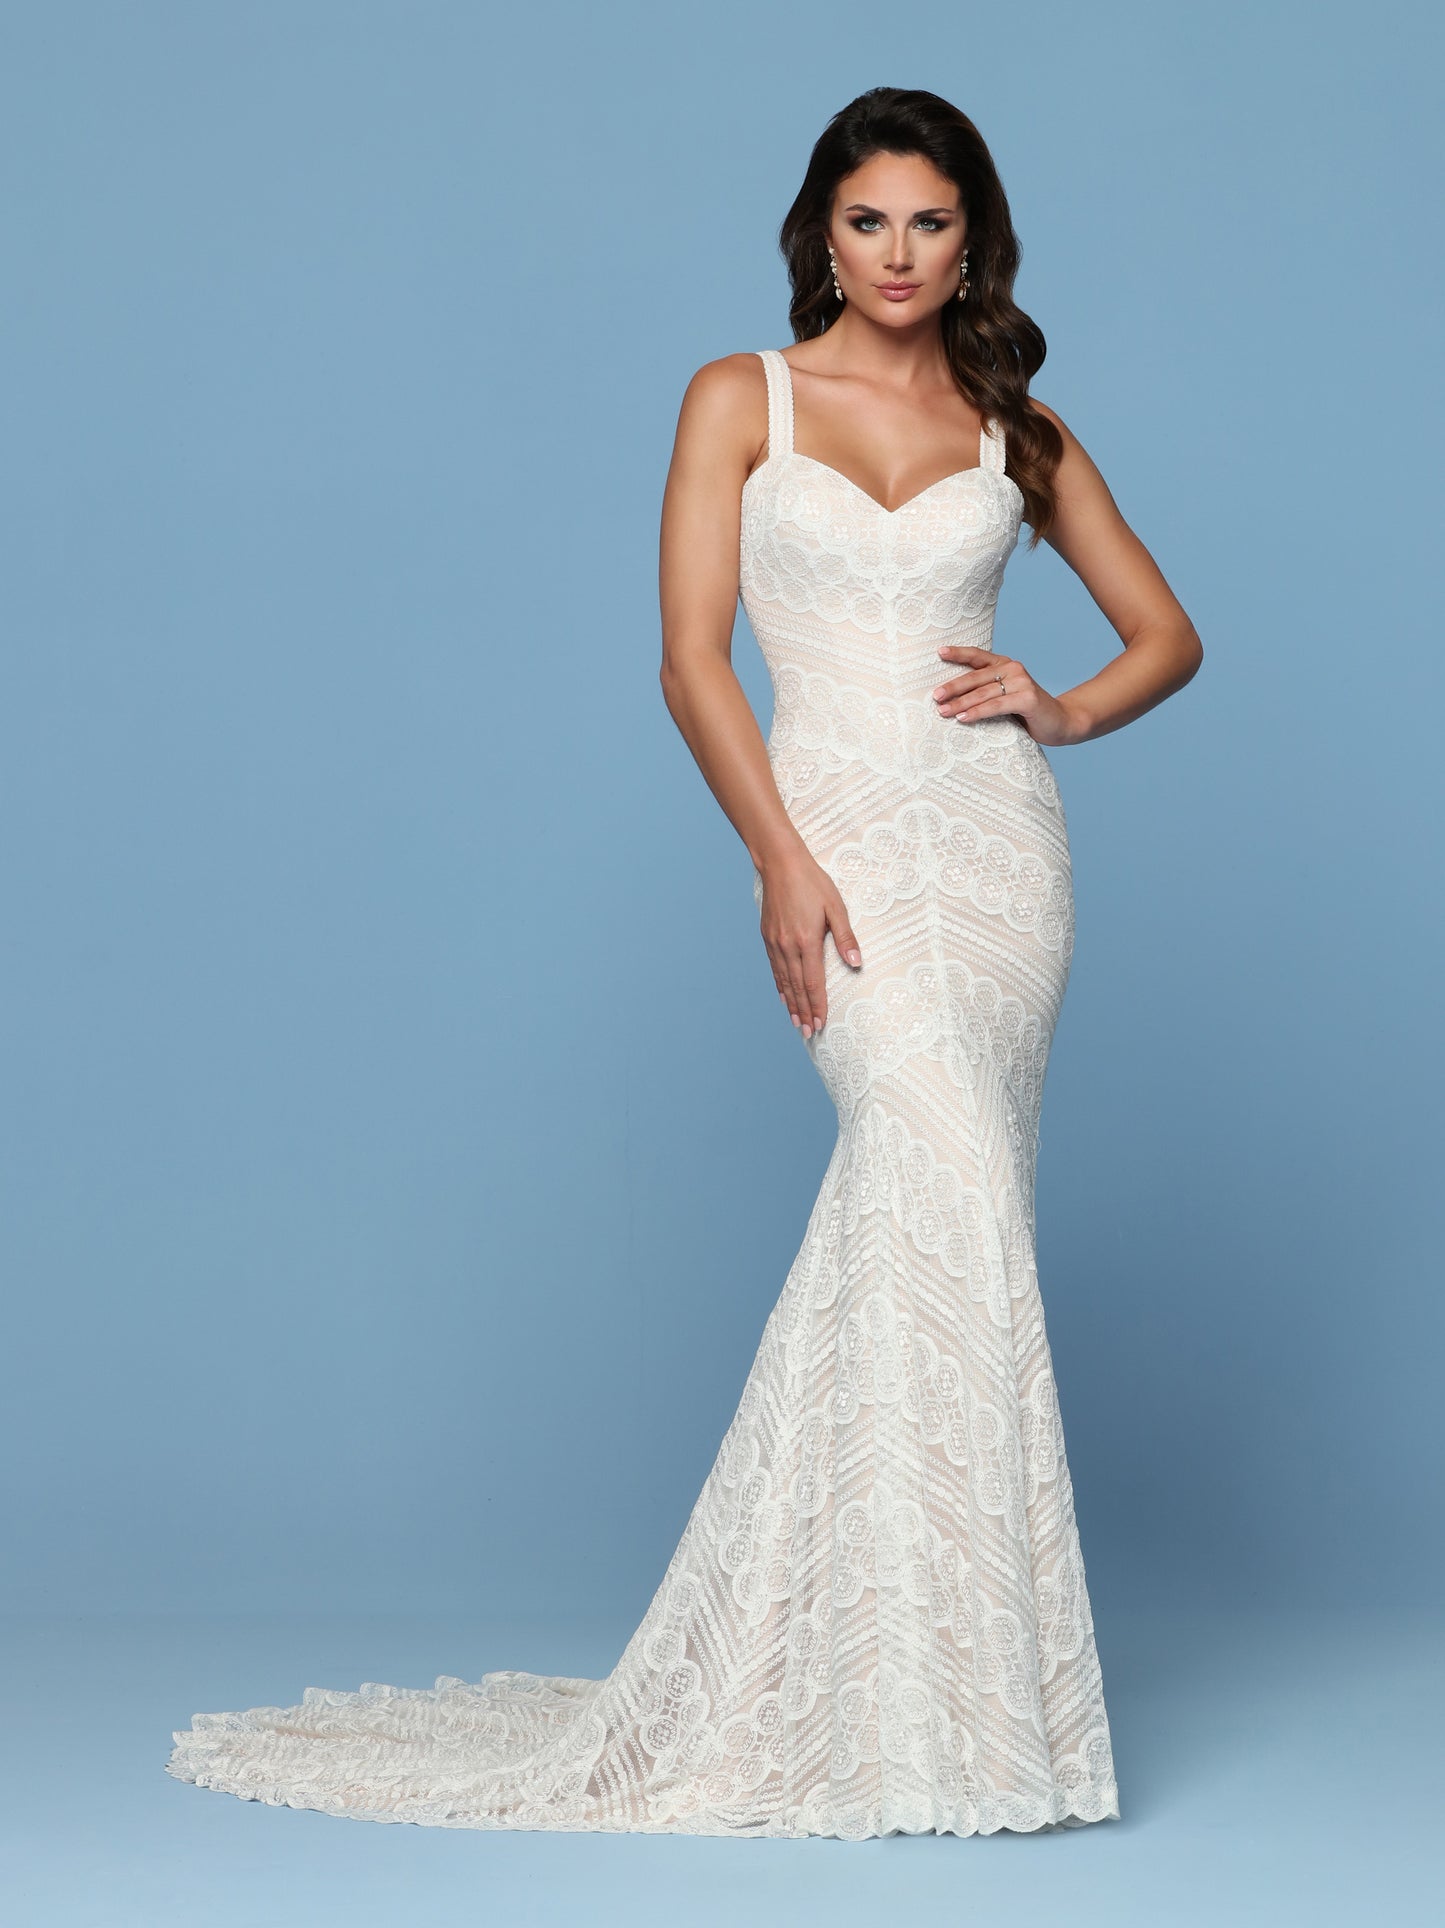 Davinci Bridal 50551 is a Beautiful Long Fitted All over Lace Wedding Dress with a Fitted Mermaid Silhouette. Sweetheart neckline with lace straps. Asymmetrical lace patterns give a sexy & Slimming affect. Train in the back  Available for 1-2 Week Delivery!!!  Available Sizes: 2,4,6,8,10,12,14,16,18,20  Available Colors: Ivory/Ivory, Ivory/Rose